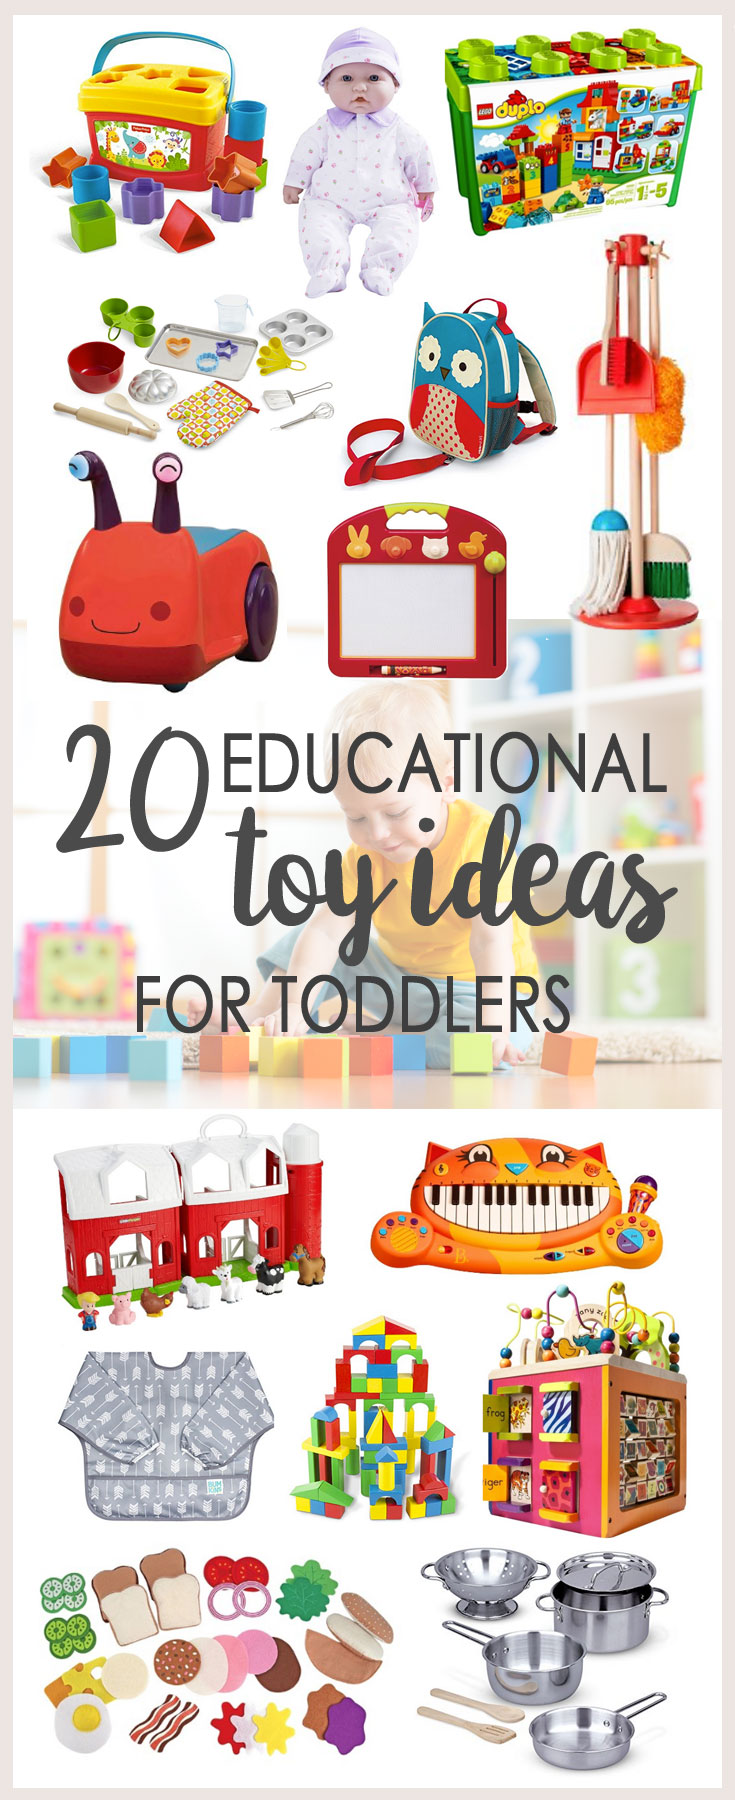 20 educational toy ideas for toddlers | mom makes joy